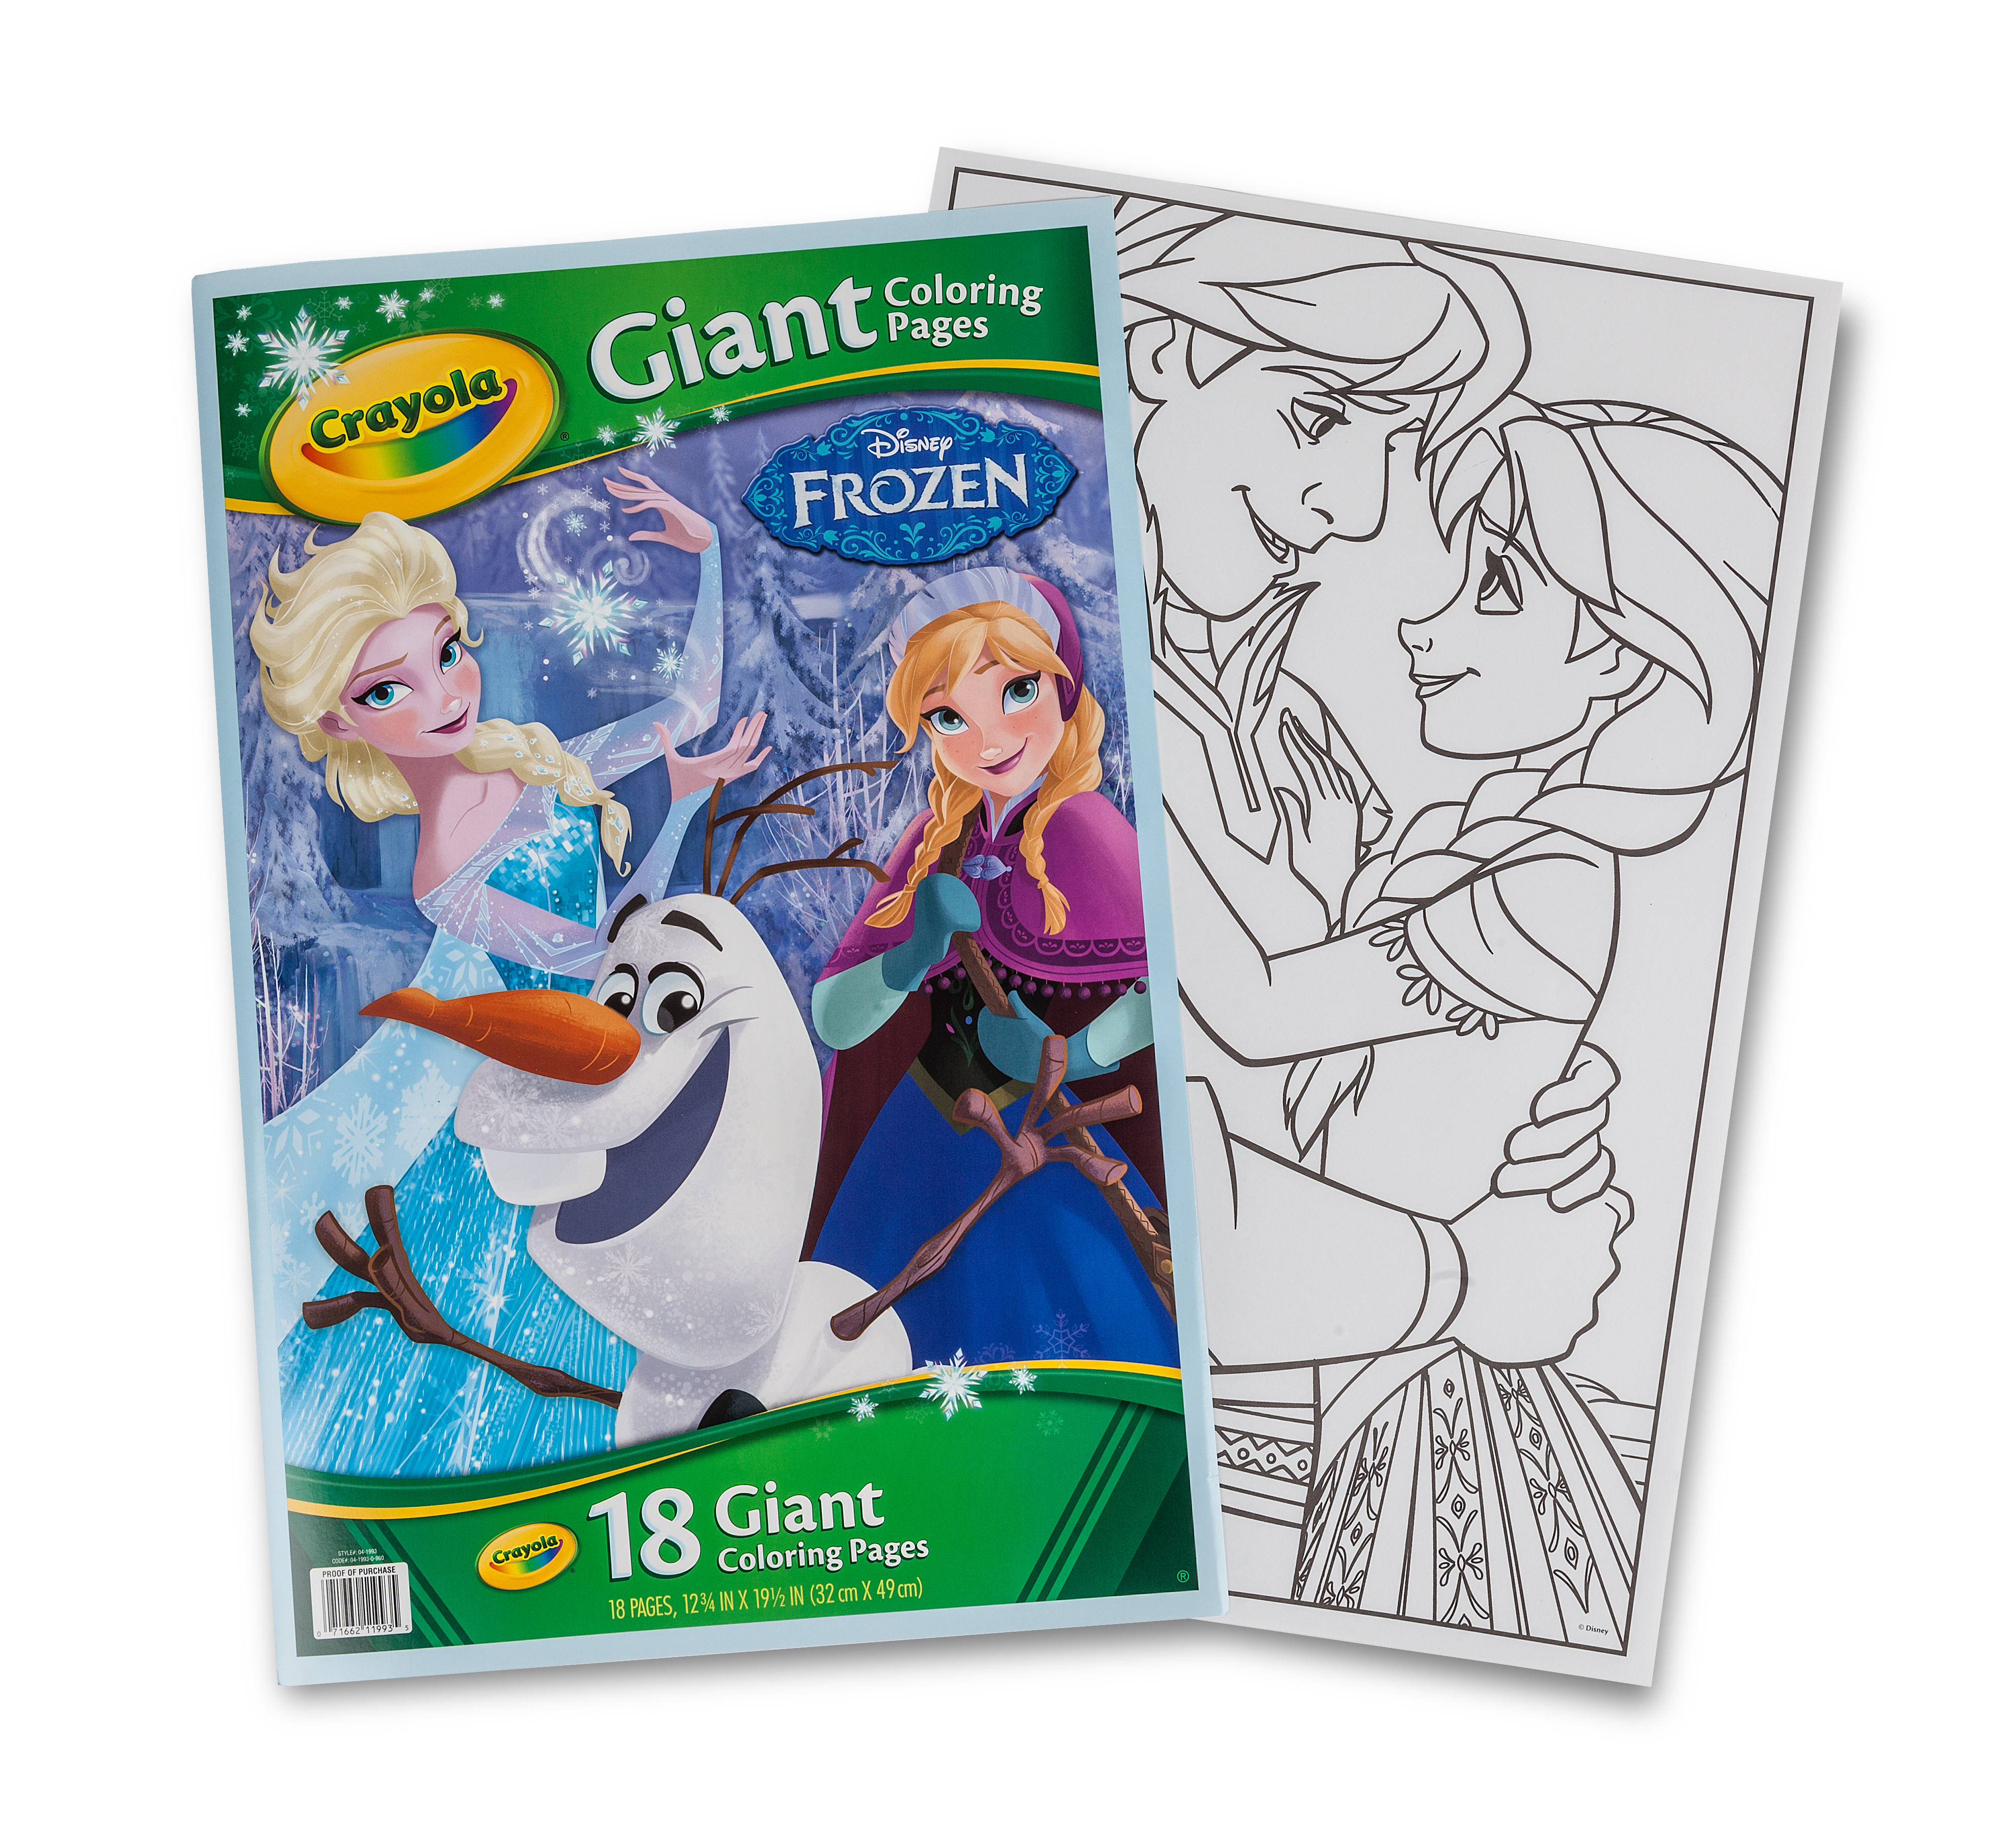 Download Giant Coloring Page - Frozen | Crayola